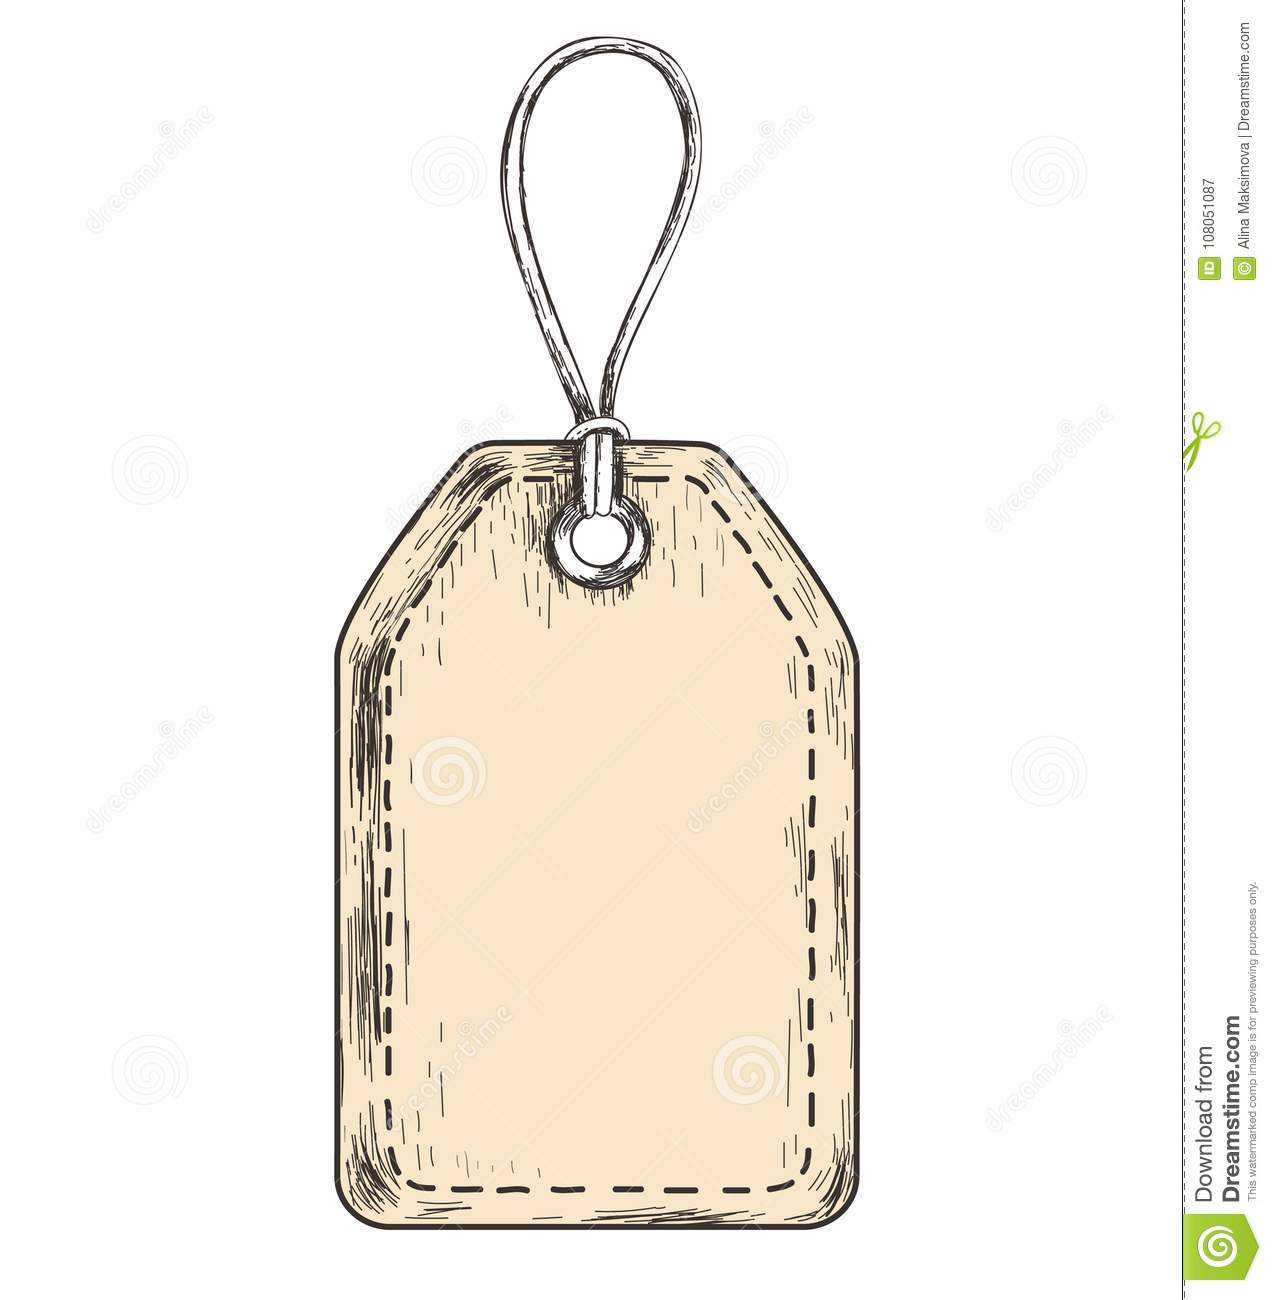 Sketch Tag For Sales. Stock Vector. Illustration Of Luggage With Regard To Blank Luggage Tag Template